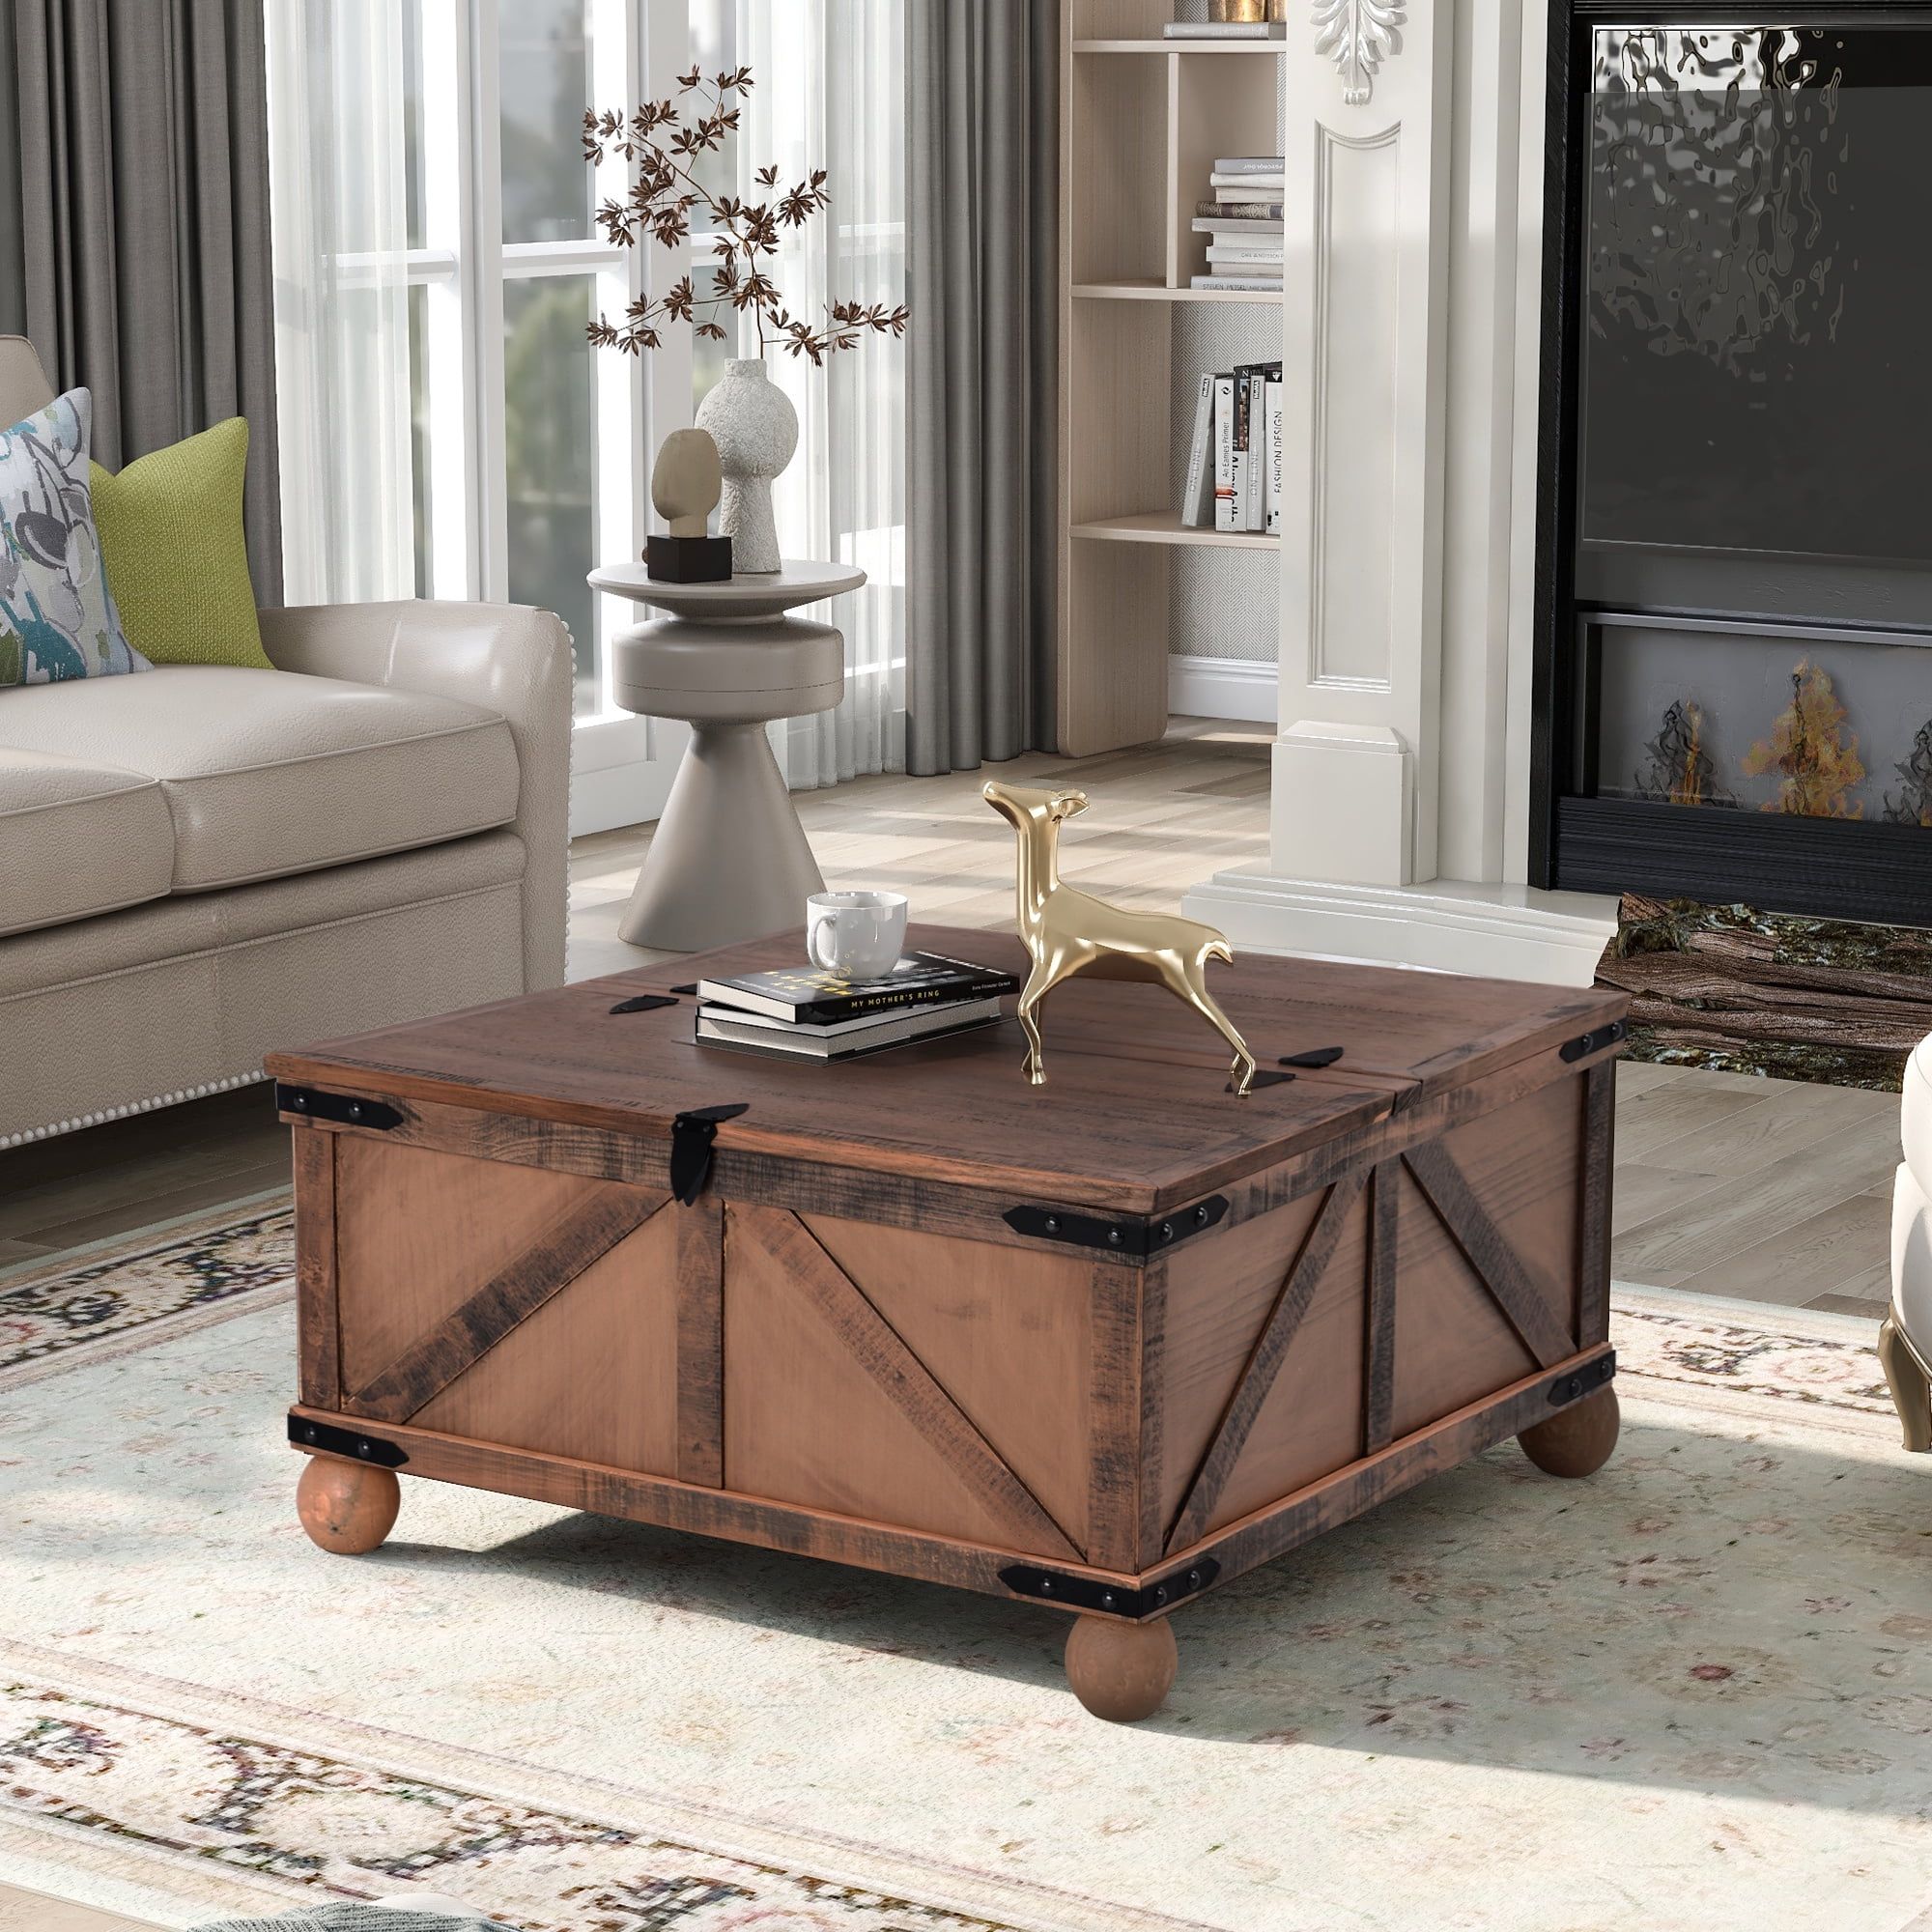 Farmhouse Square Coffee Table With Lift Top For Storage, Brown Within Farmhouse Lift Top Tables (Gallery 7 of 20)